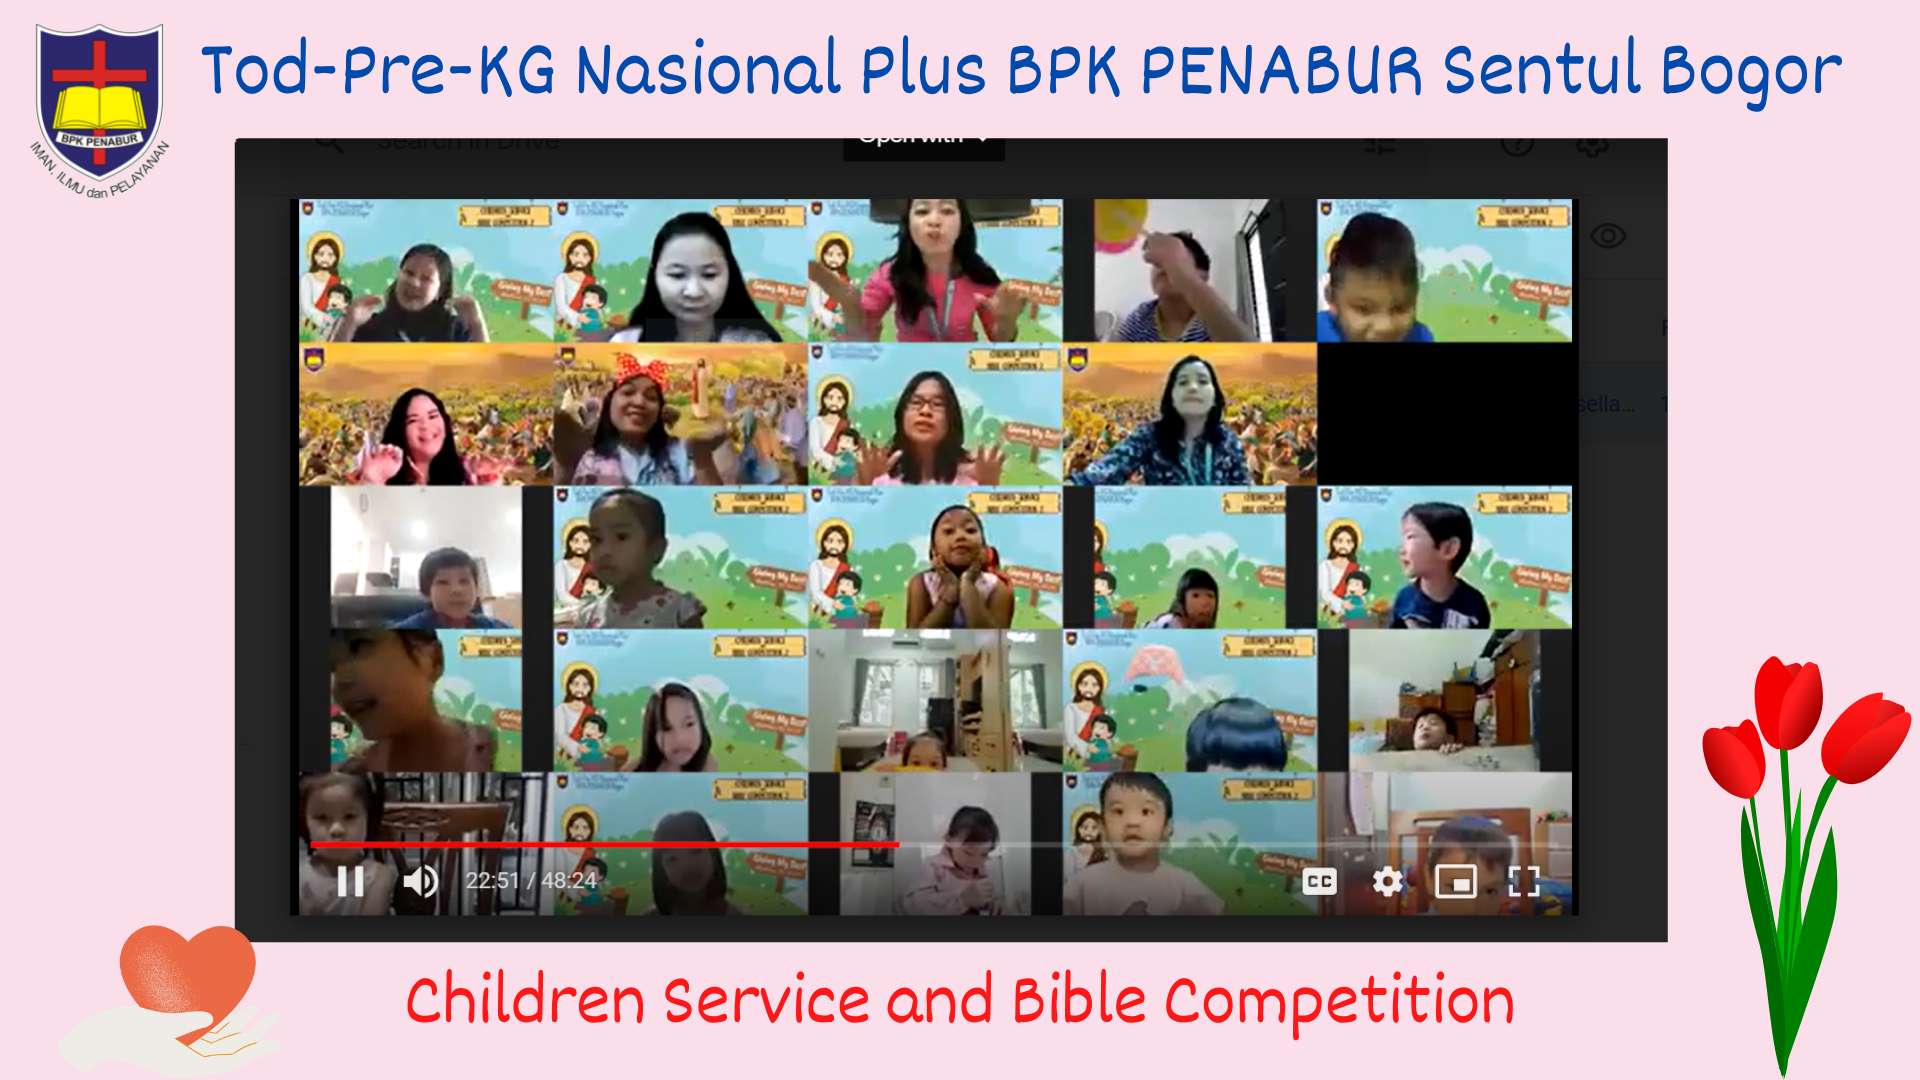 Children Service and Bible Competition